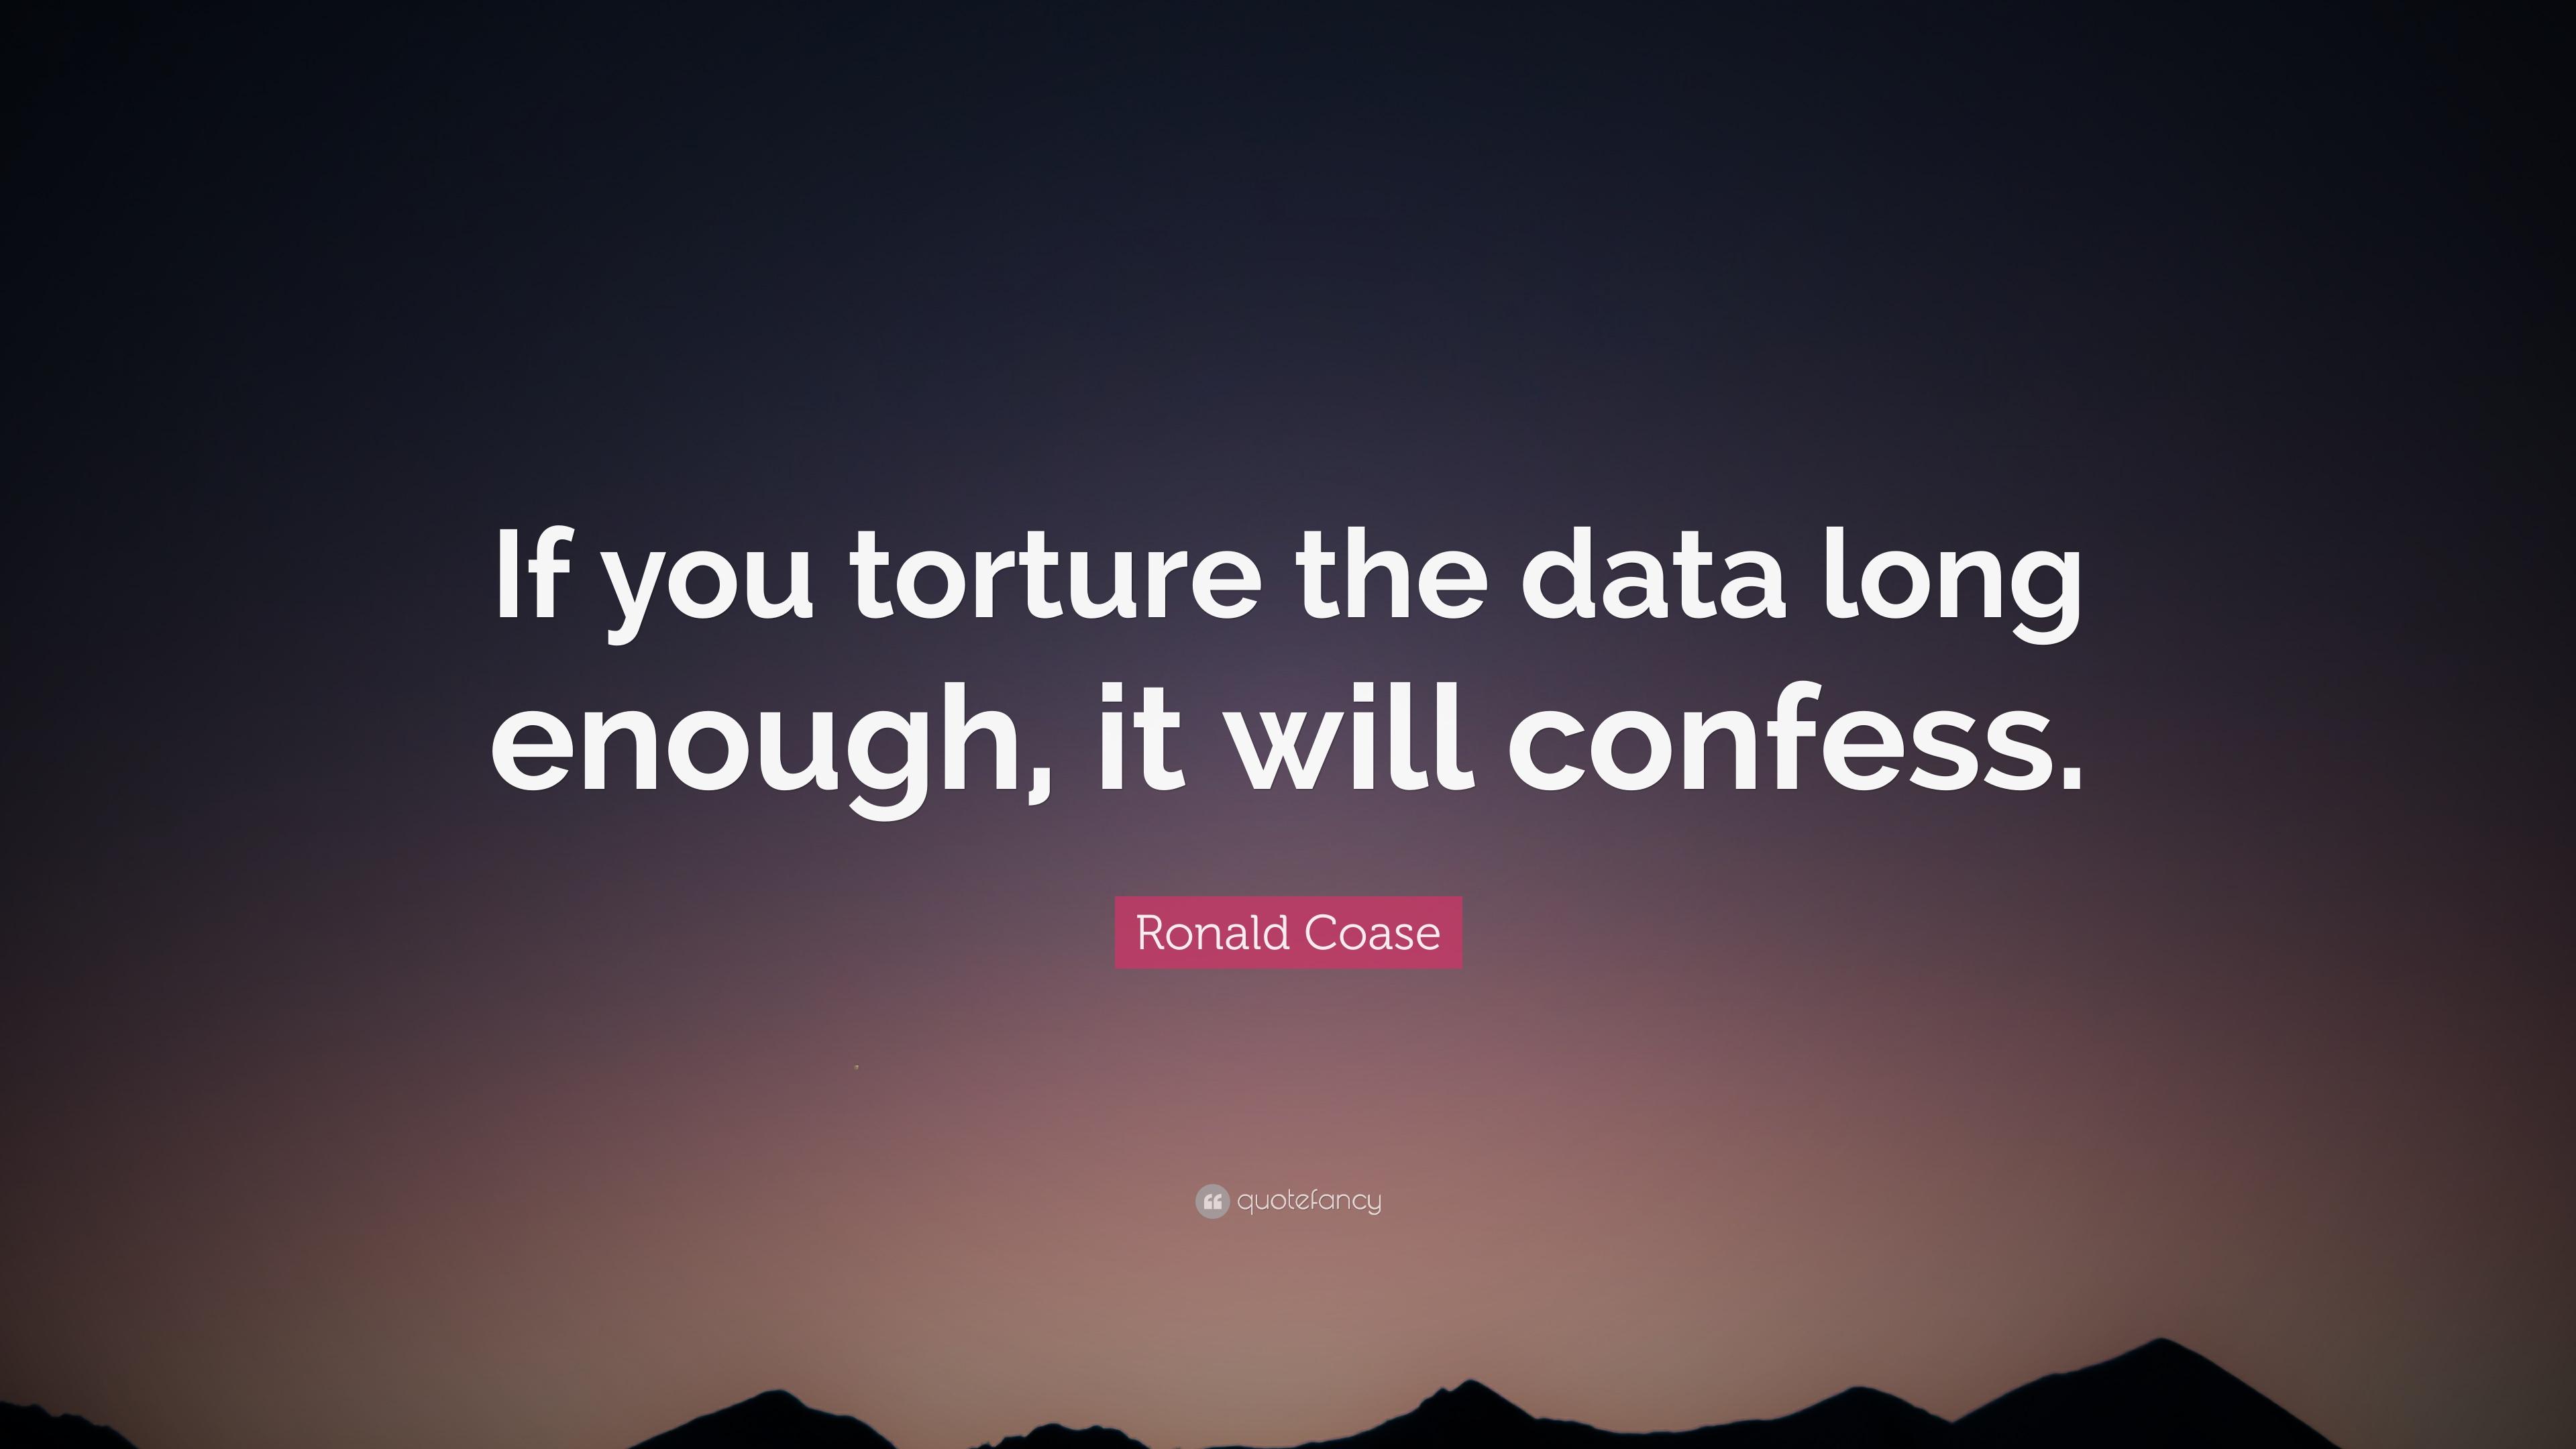 Ronald Coase Quote: “If you torture the data long enough, it will